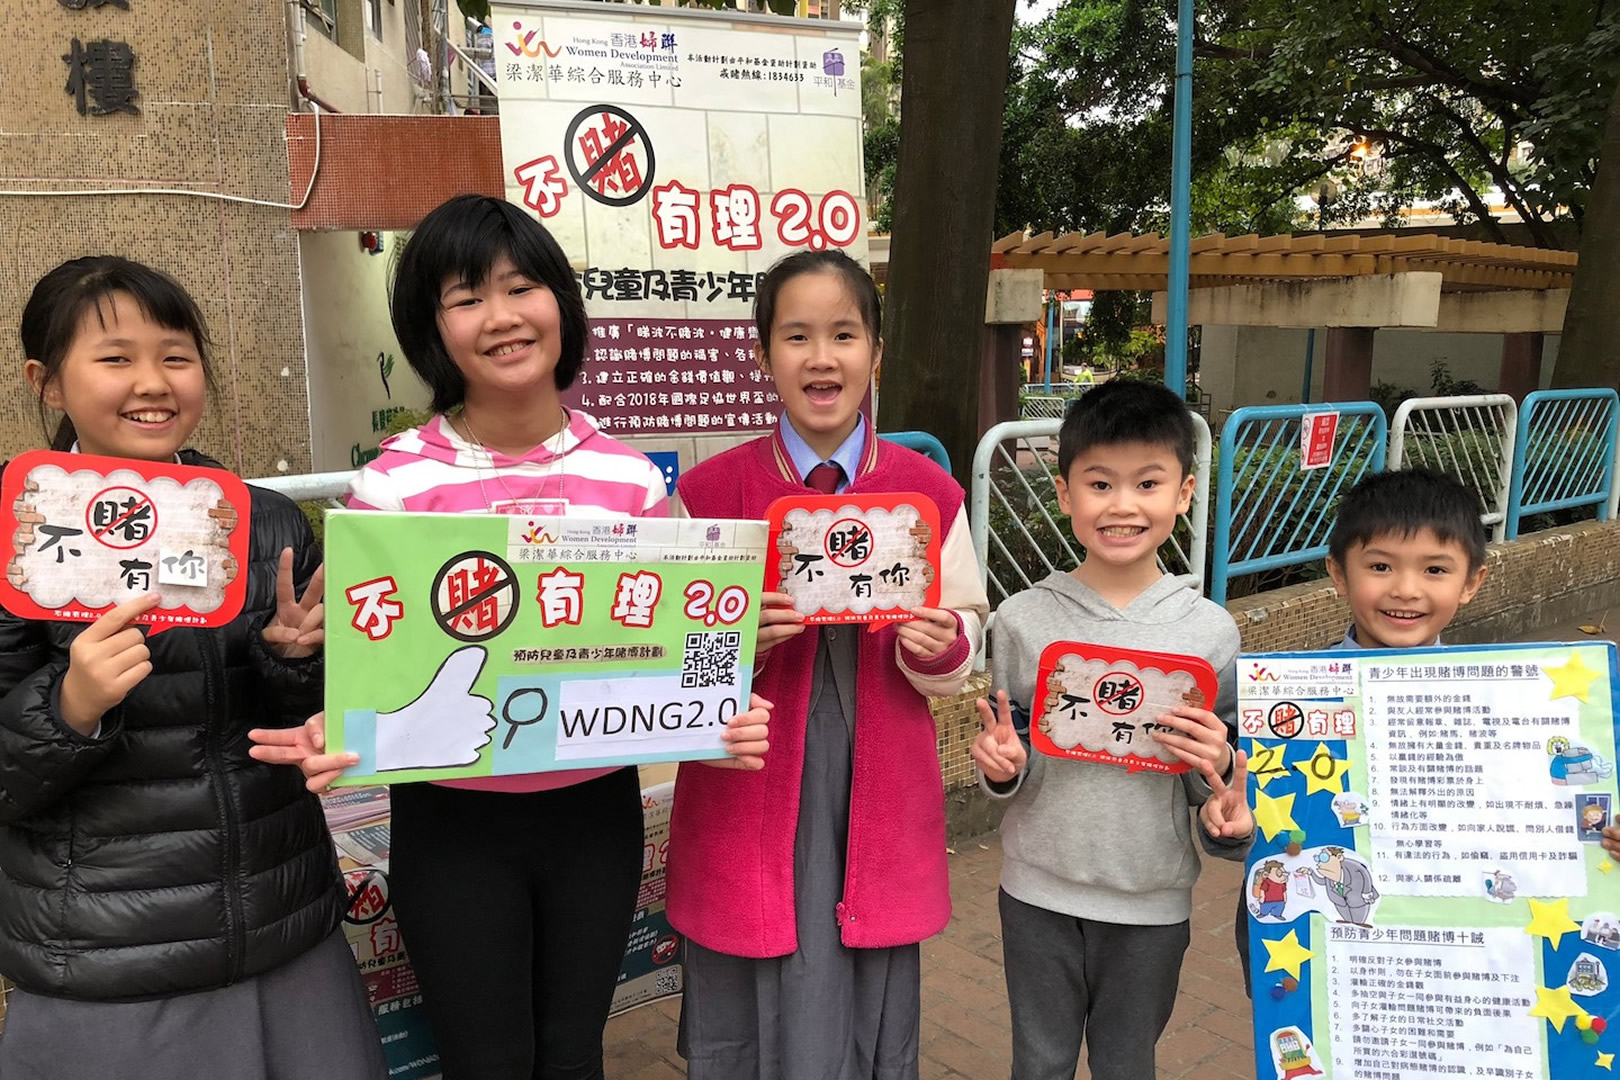 There was a roadshow at Tai Yuen Estate in Tai Po and leaflets were distributed to the residents. 